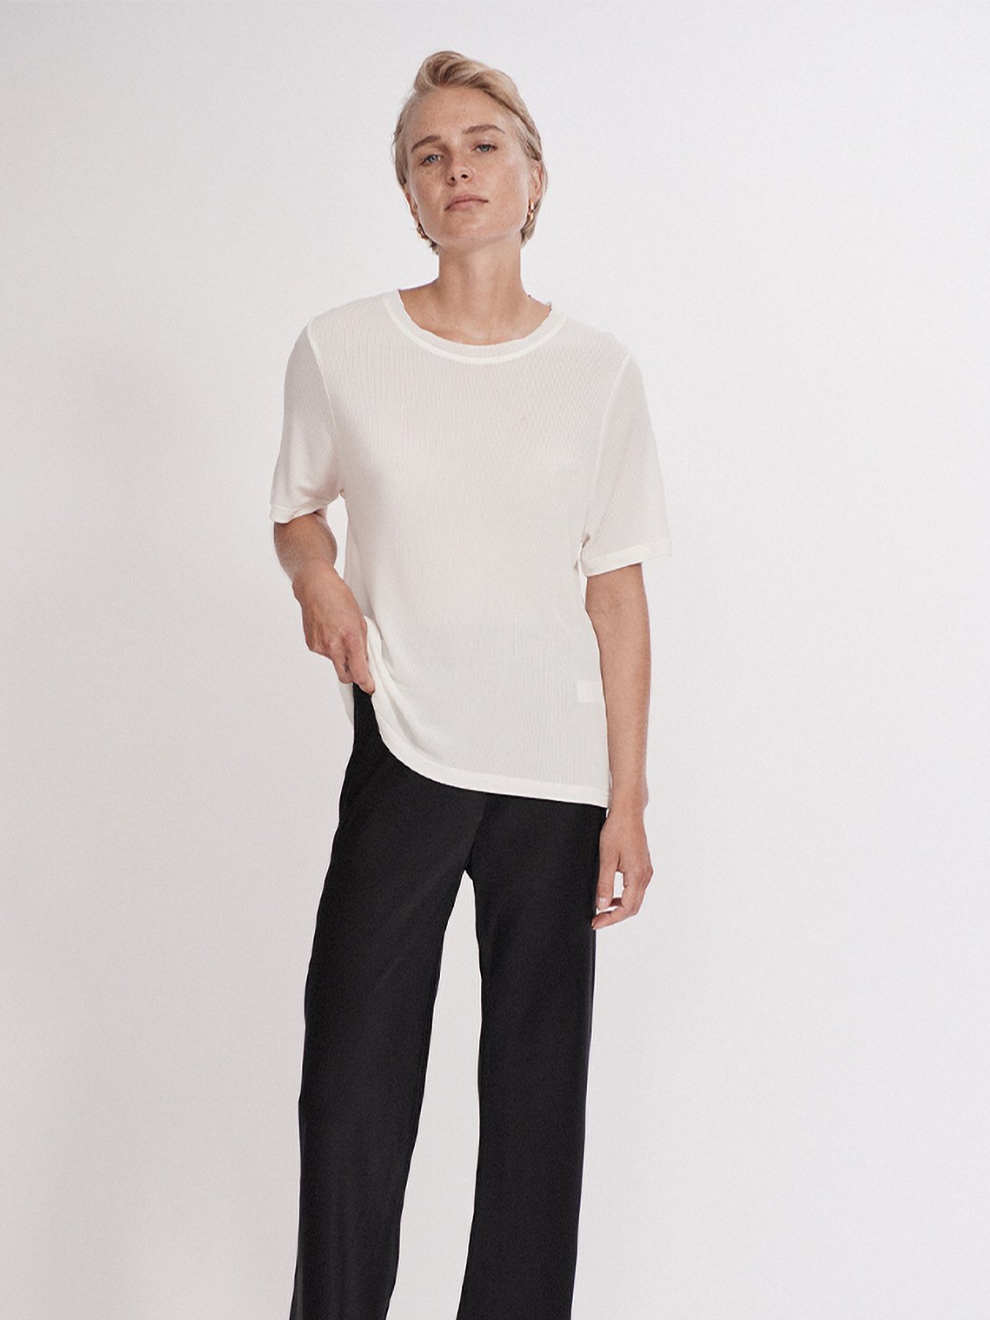 Silk White Ribbed T-shirt by Silk Laundry with Silk Black bias cut pants